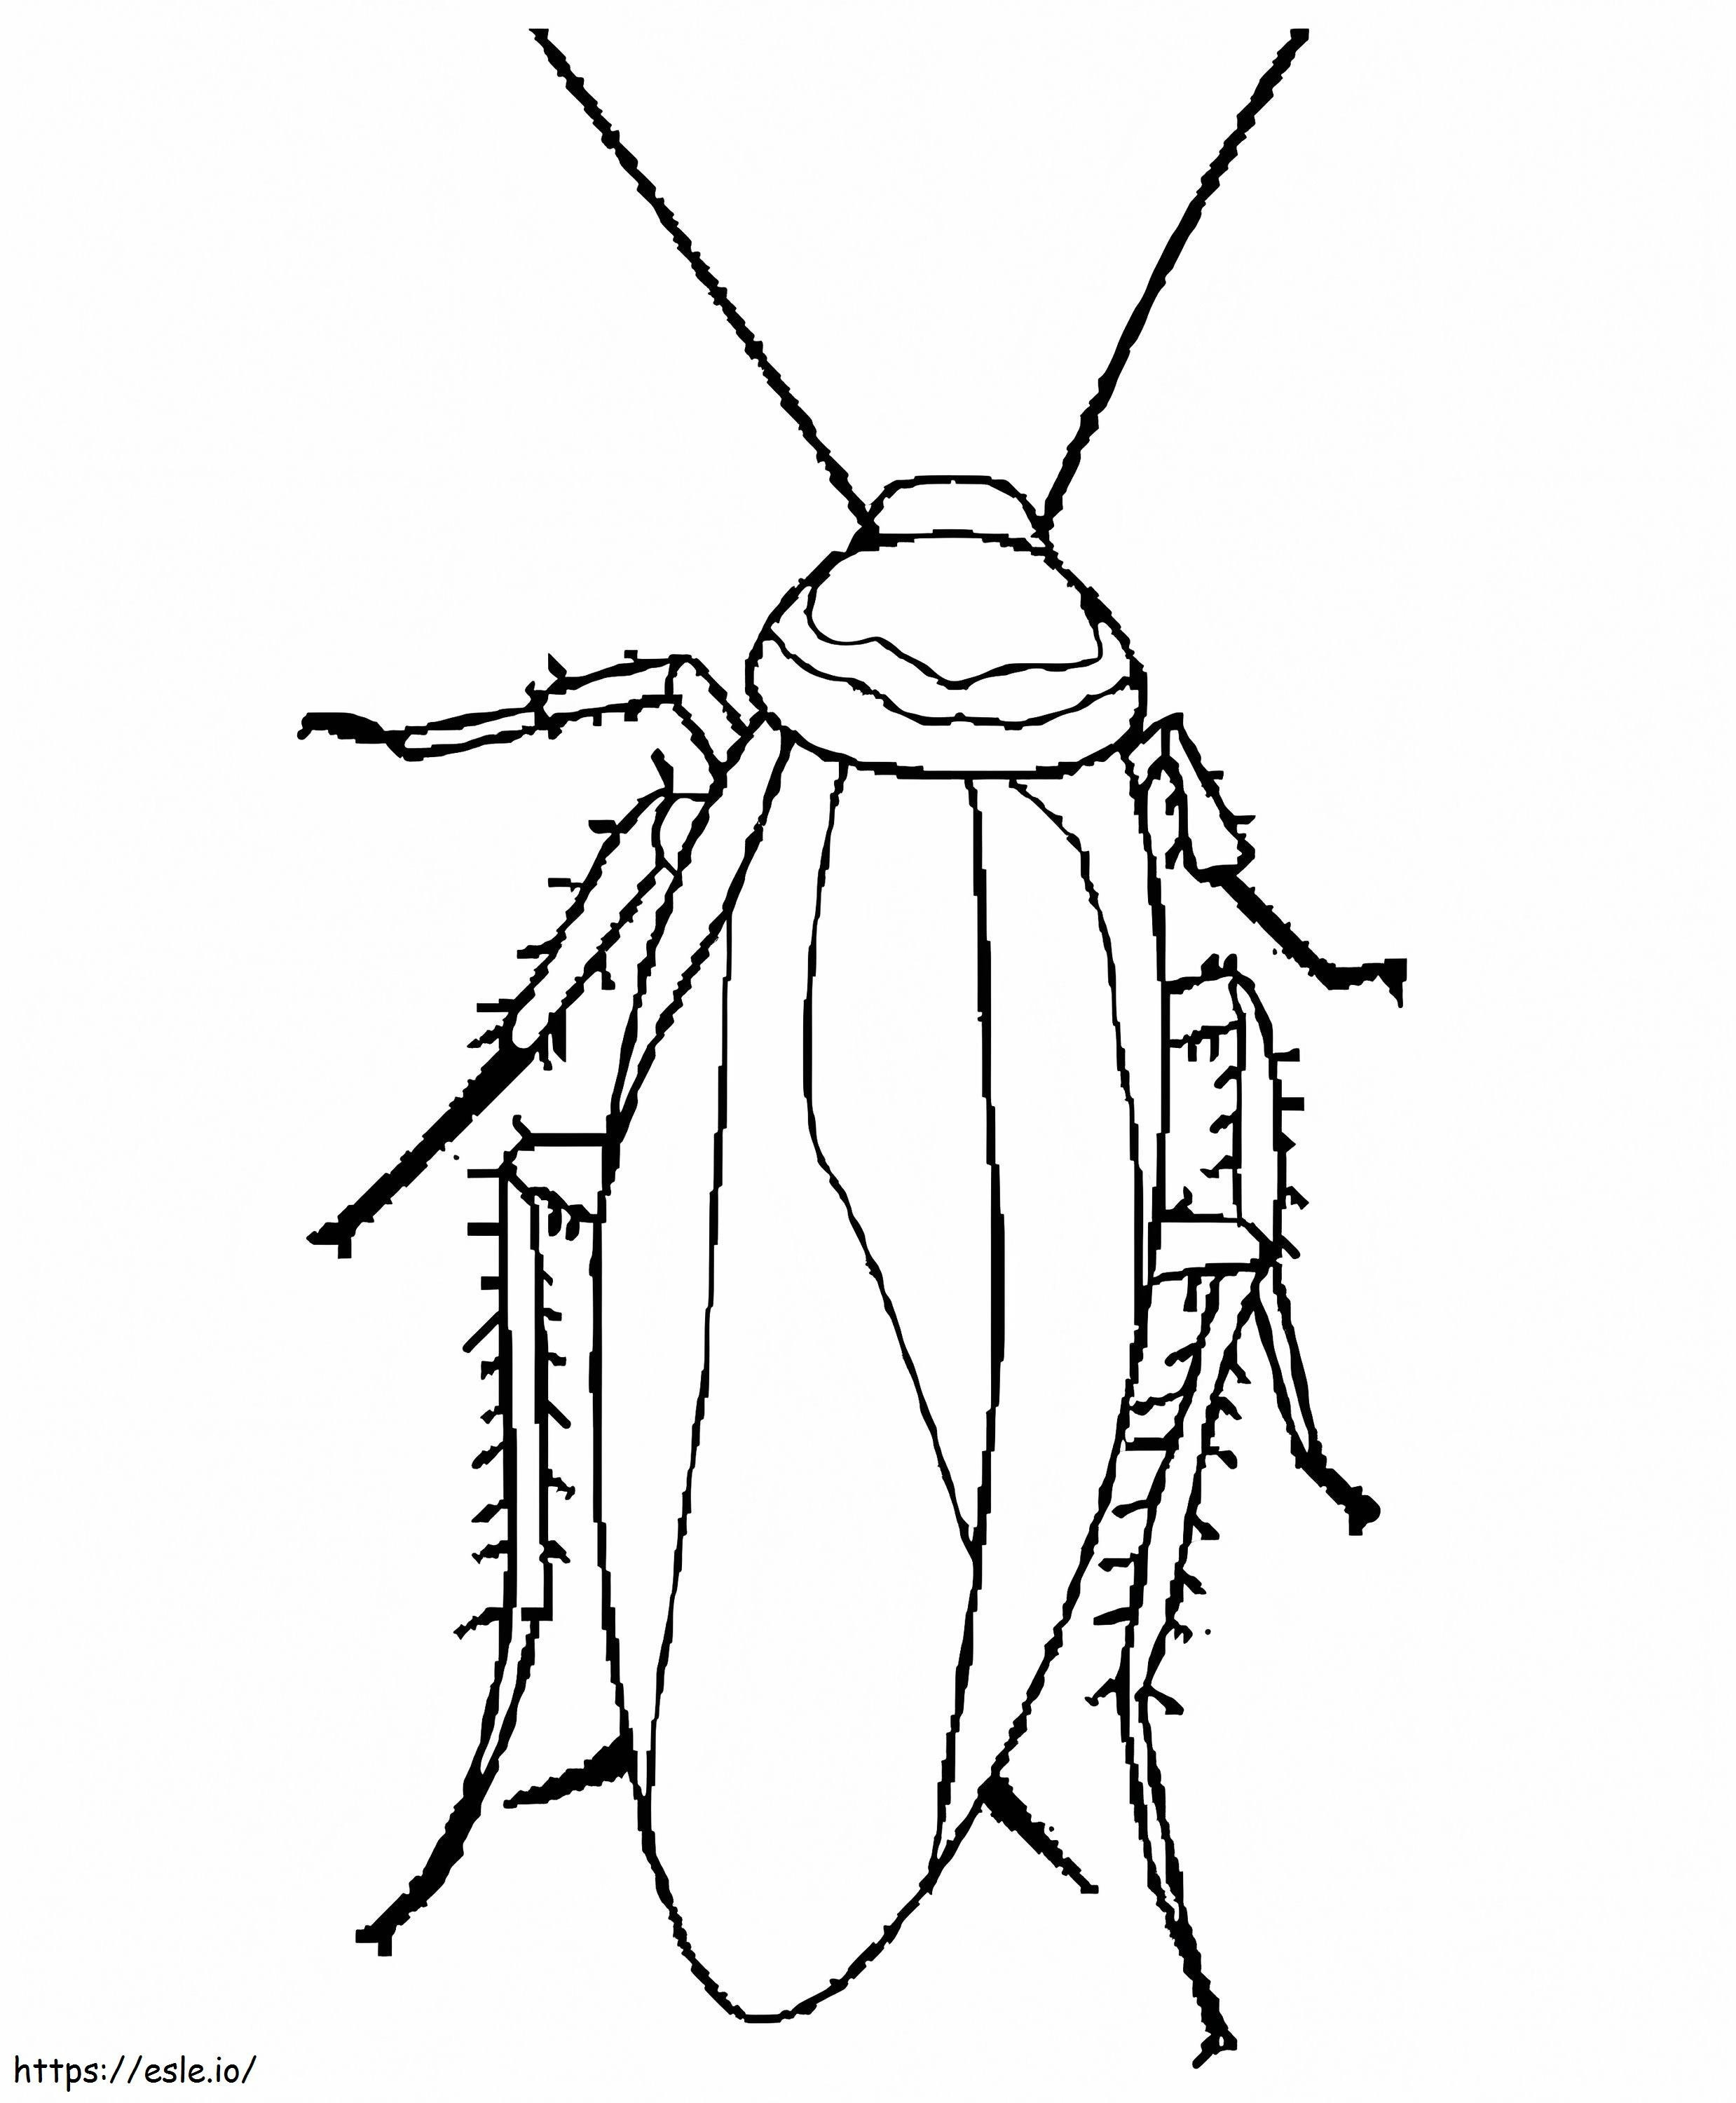 A Normal Cockroach coloring page